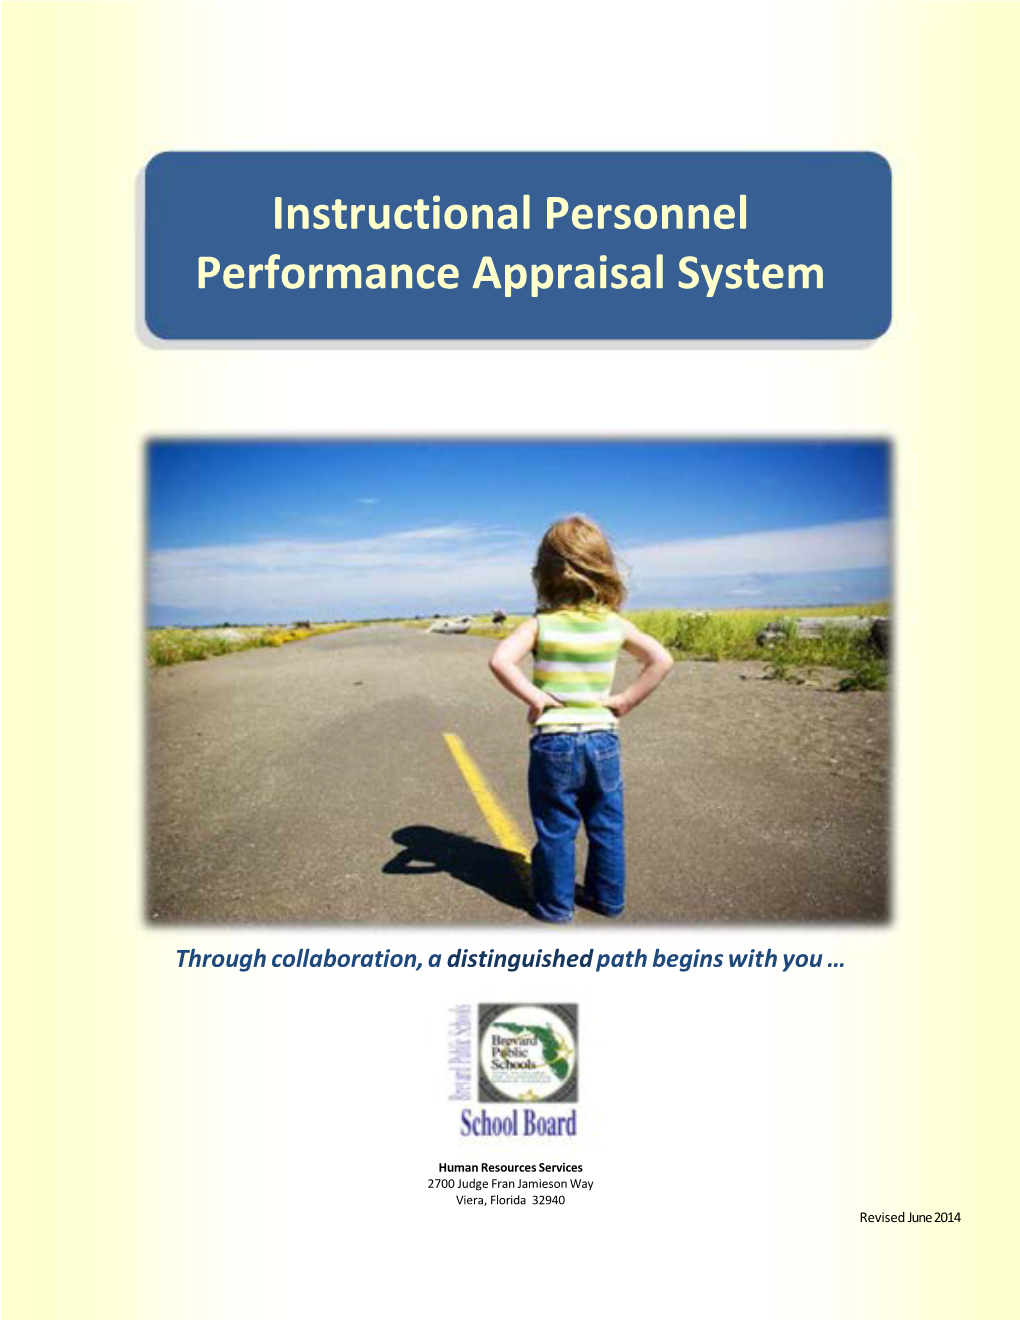 Instructional Personnel Performance Appraisal System